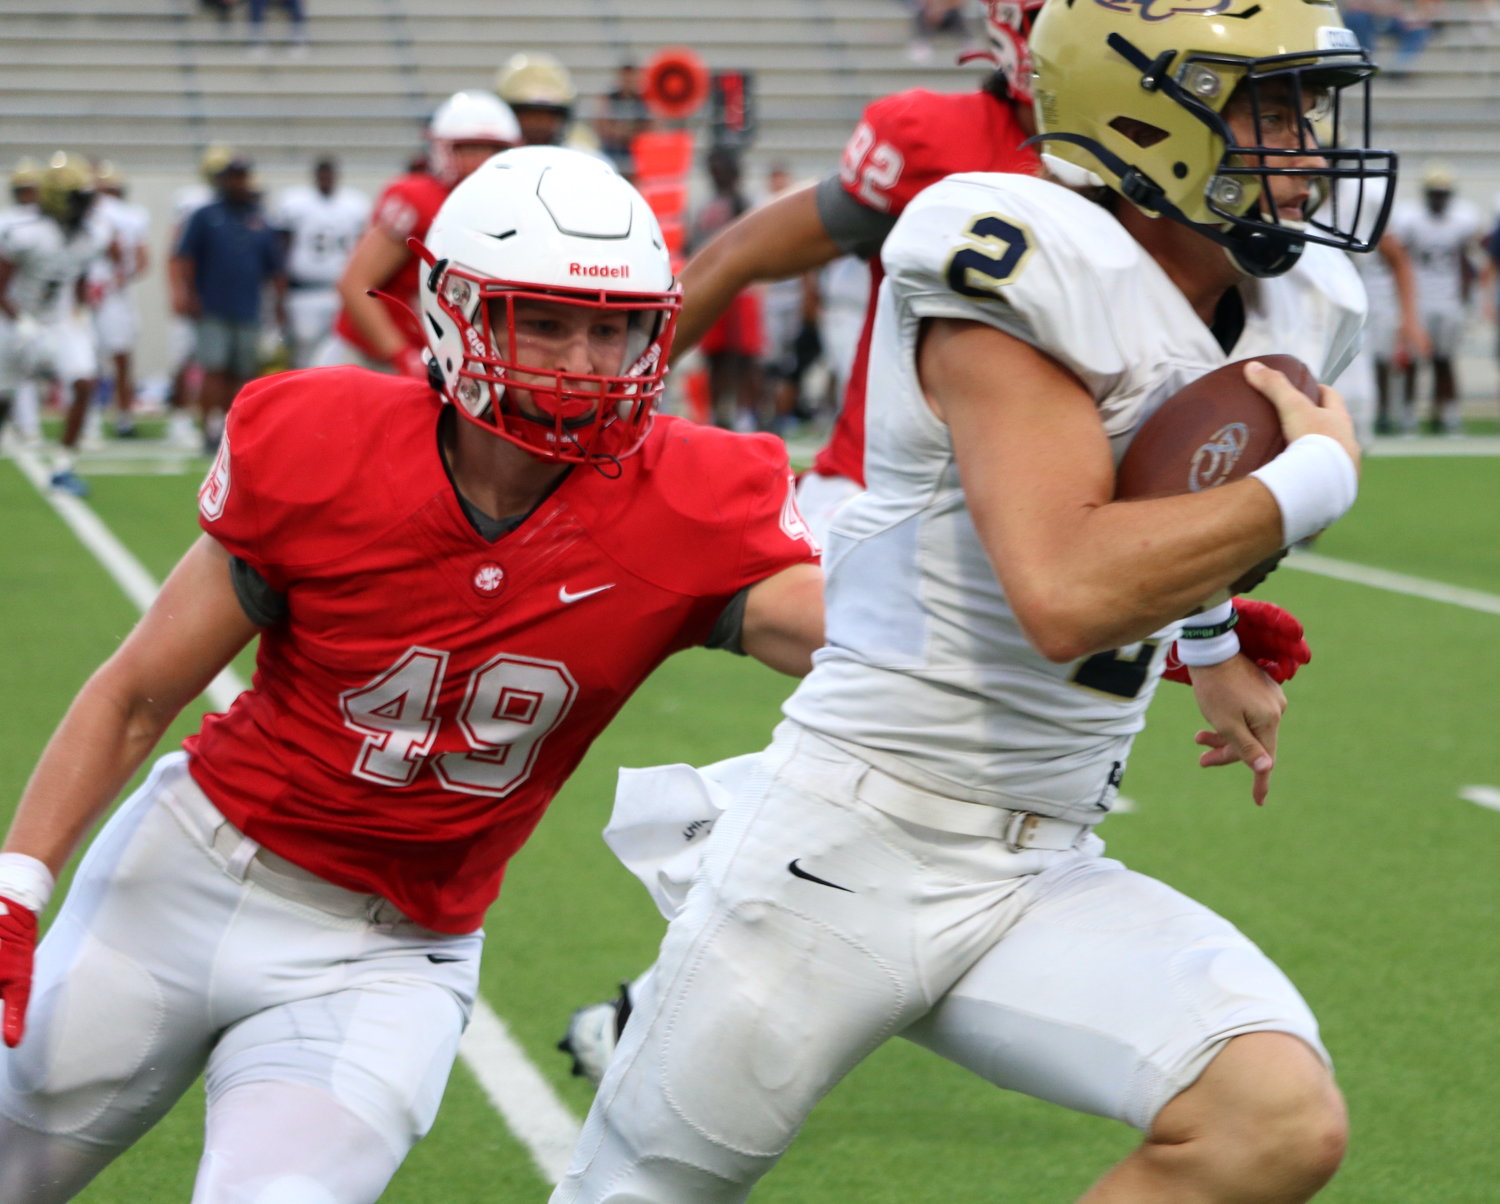 Katy’s Connor Johnsey tries to make a tackle during Katy’s scrimmage against Klein Collins on Friday at Legacy Stadium.